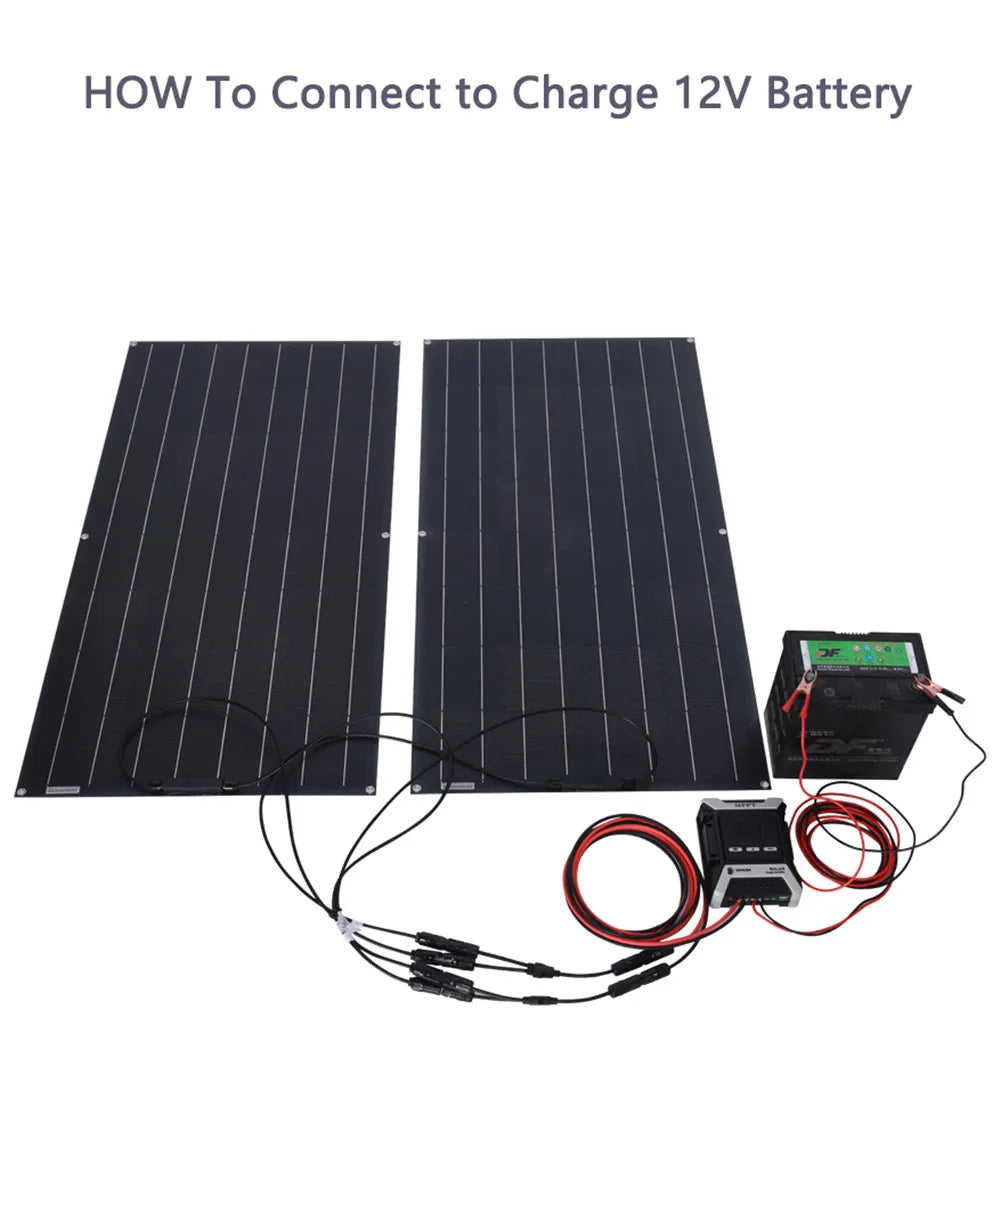 400W 300W 200W 100W Etfe Flexible Solar Panel, Connect to charge 12V battery using included charger.